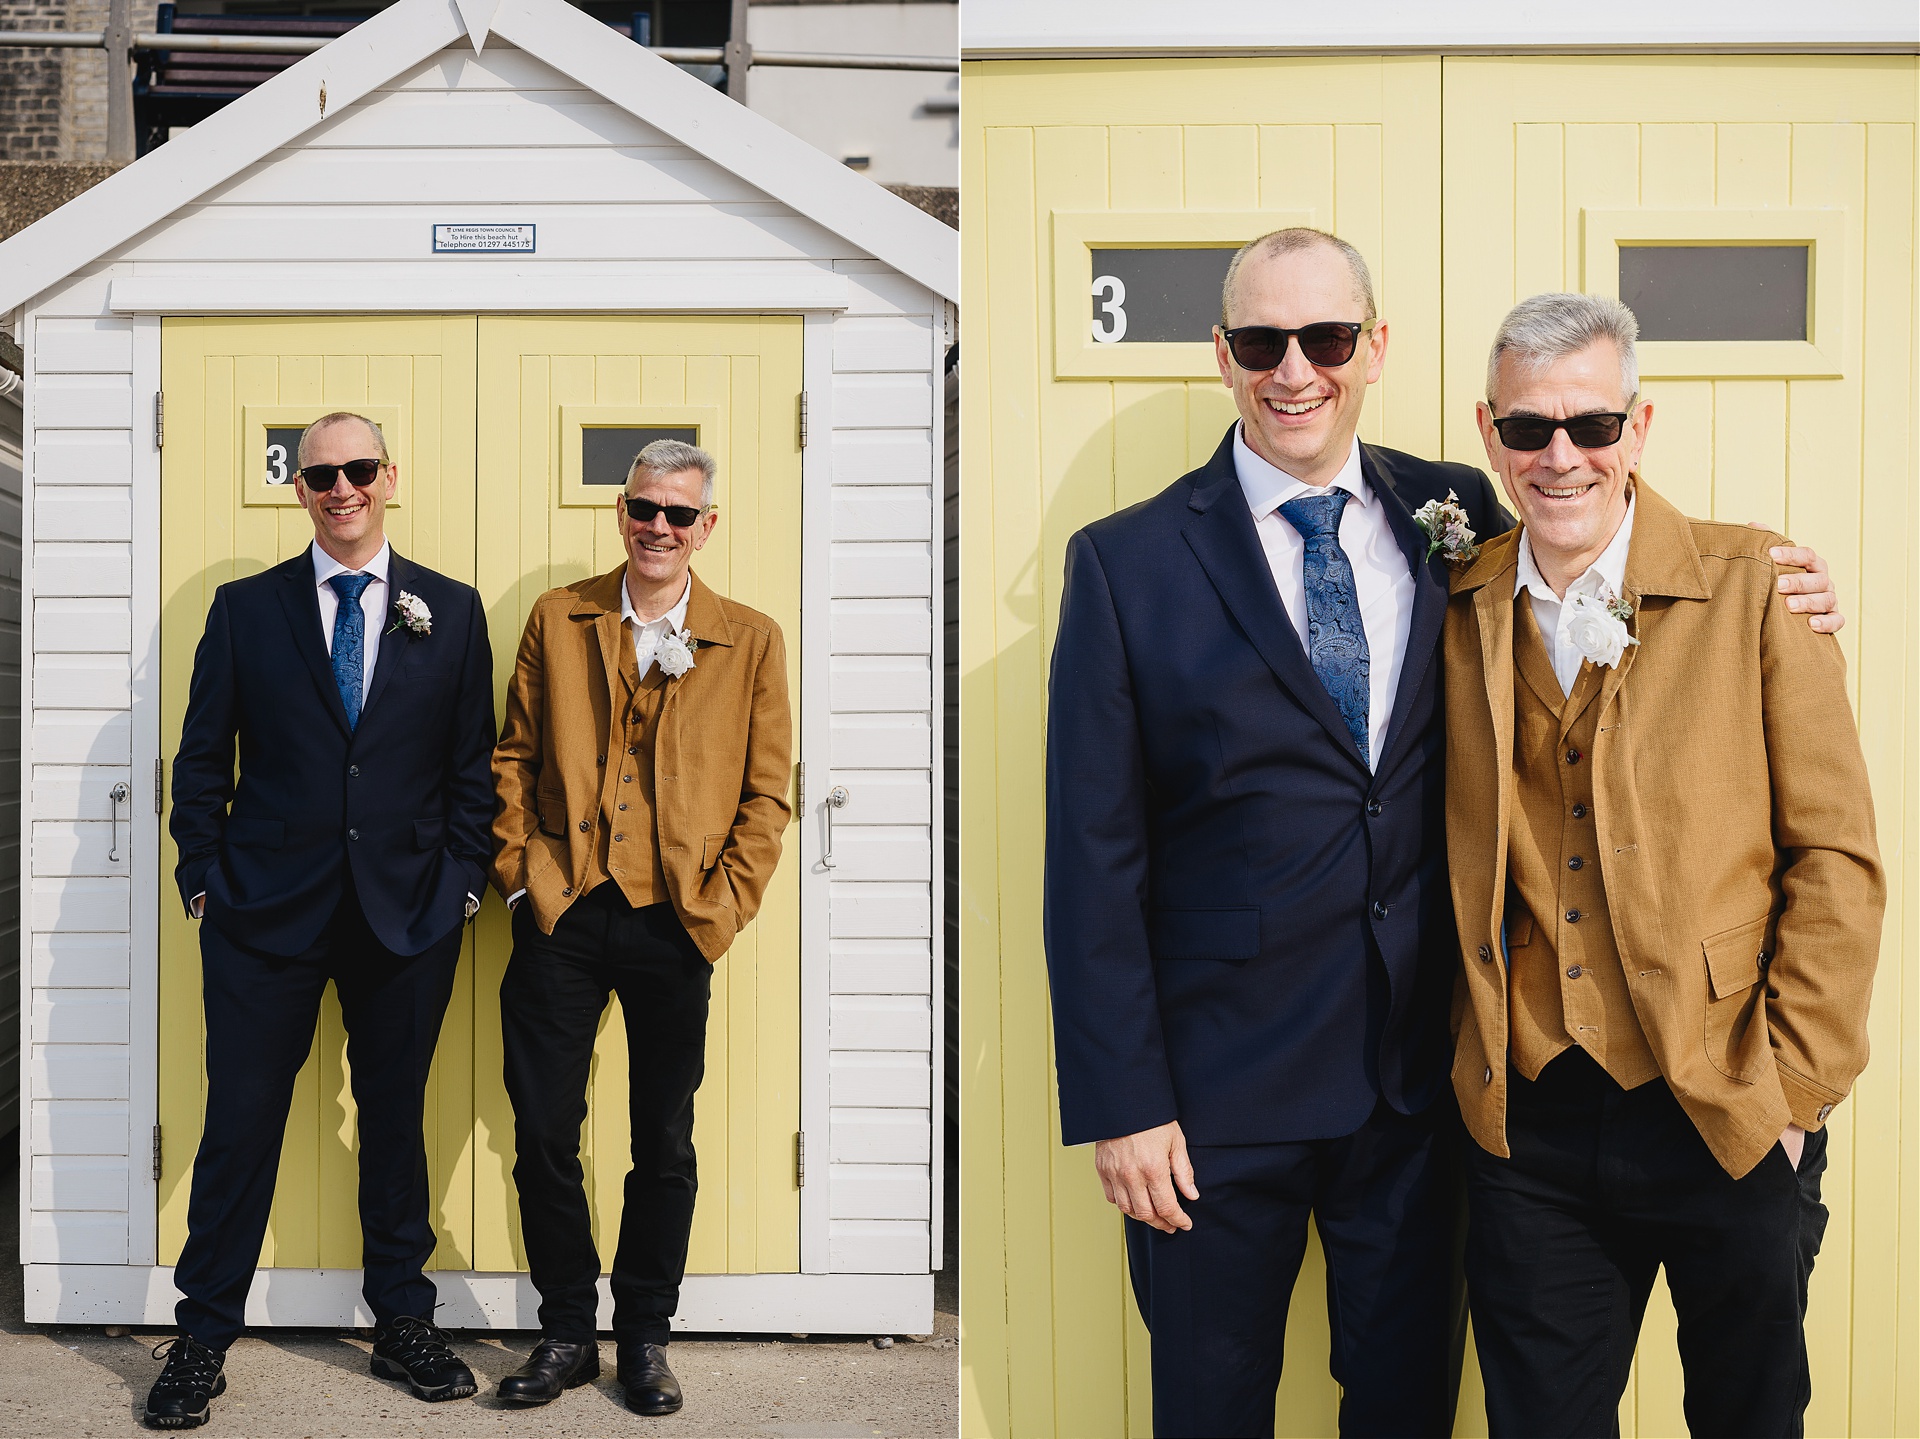 Groom and best man smiling by a yellow beach hut